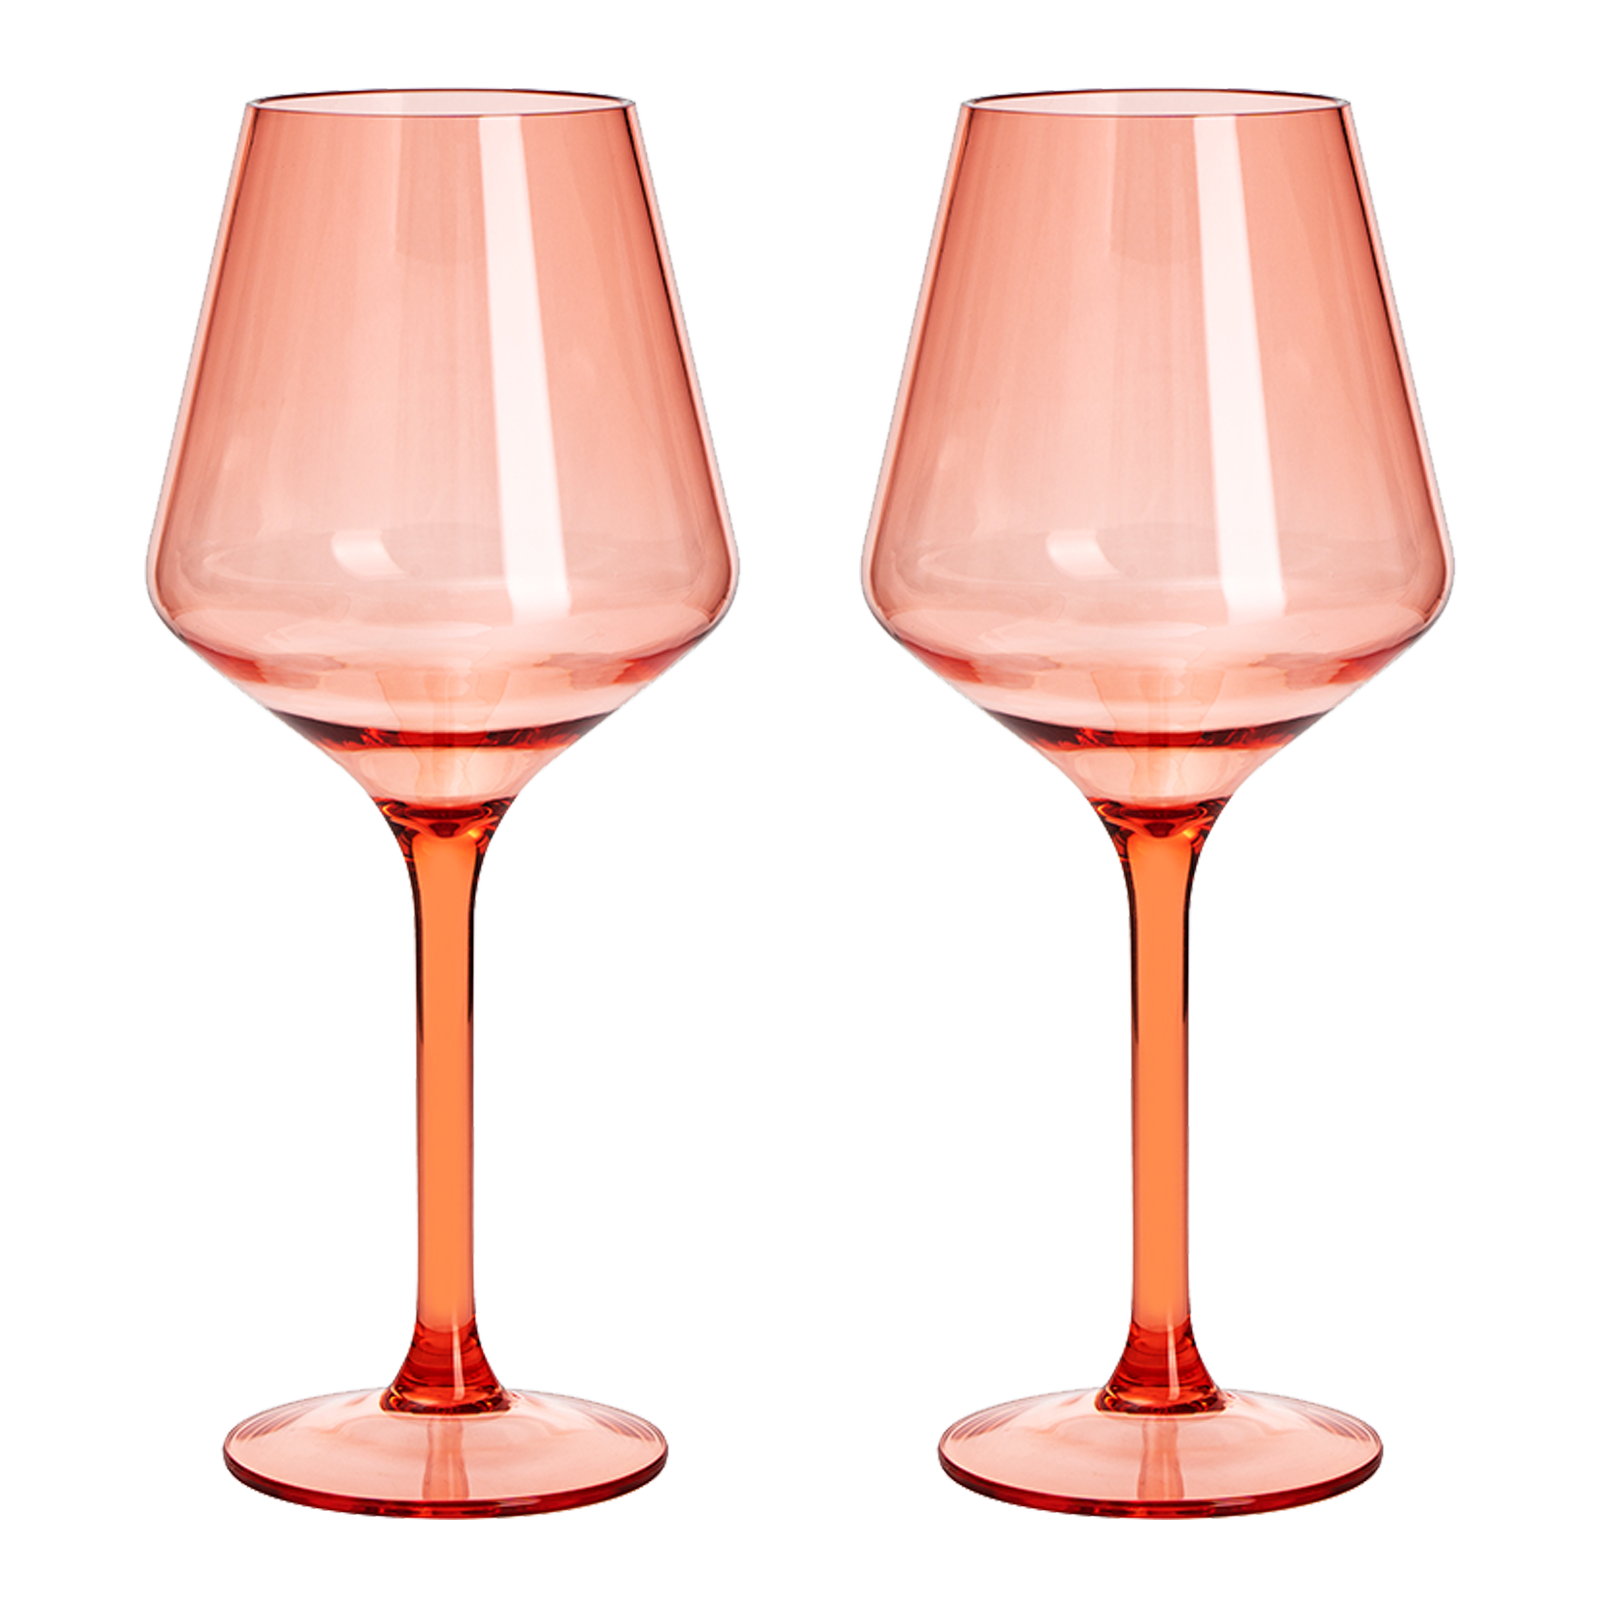 2PCS Beach Glass Floating Glass Acrylic Shatterproof Wine Beer Cocktail Drinking  Glasses Goblets For Pool Beach